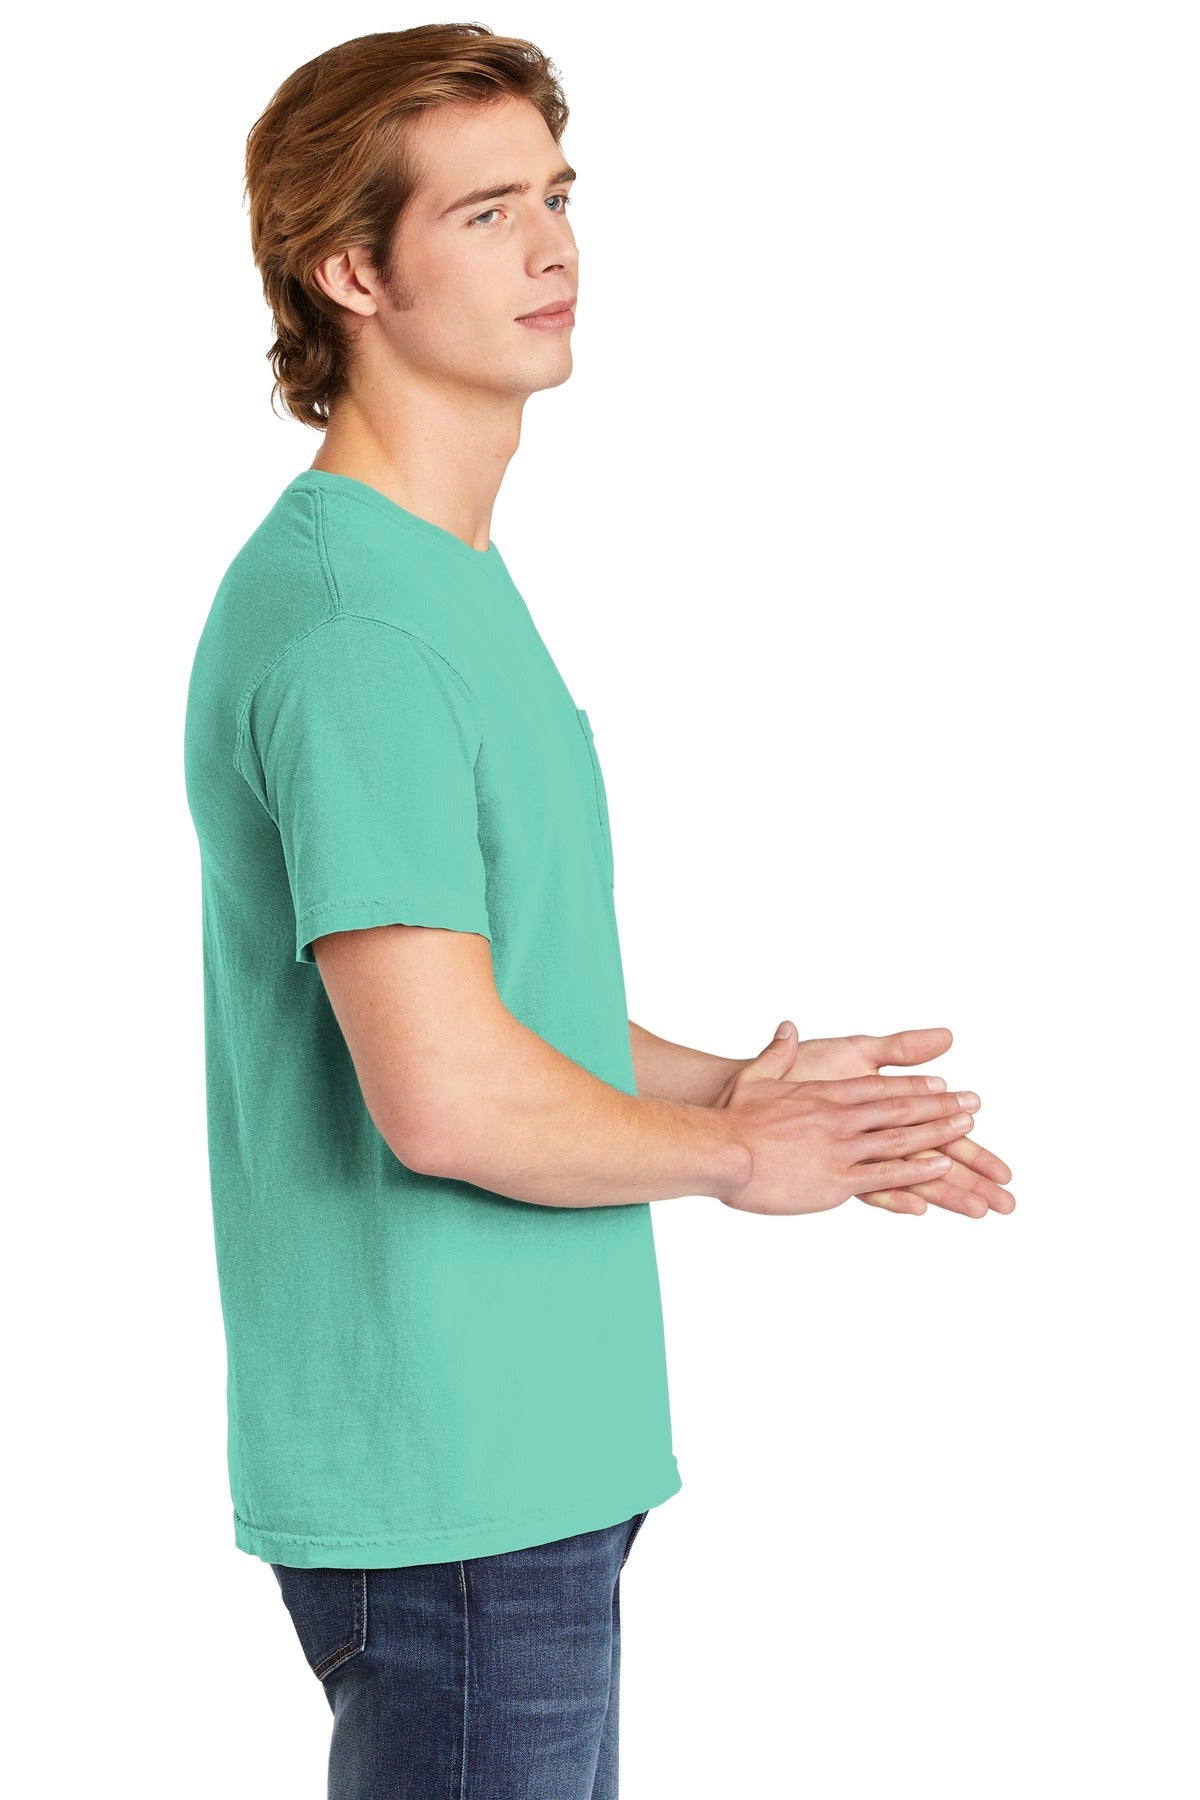 COMFORT COLORS ® Heavyweight Ring Spun Pocket Tee. 6030 [Chalky Mint] - DFW Impression